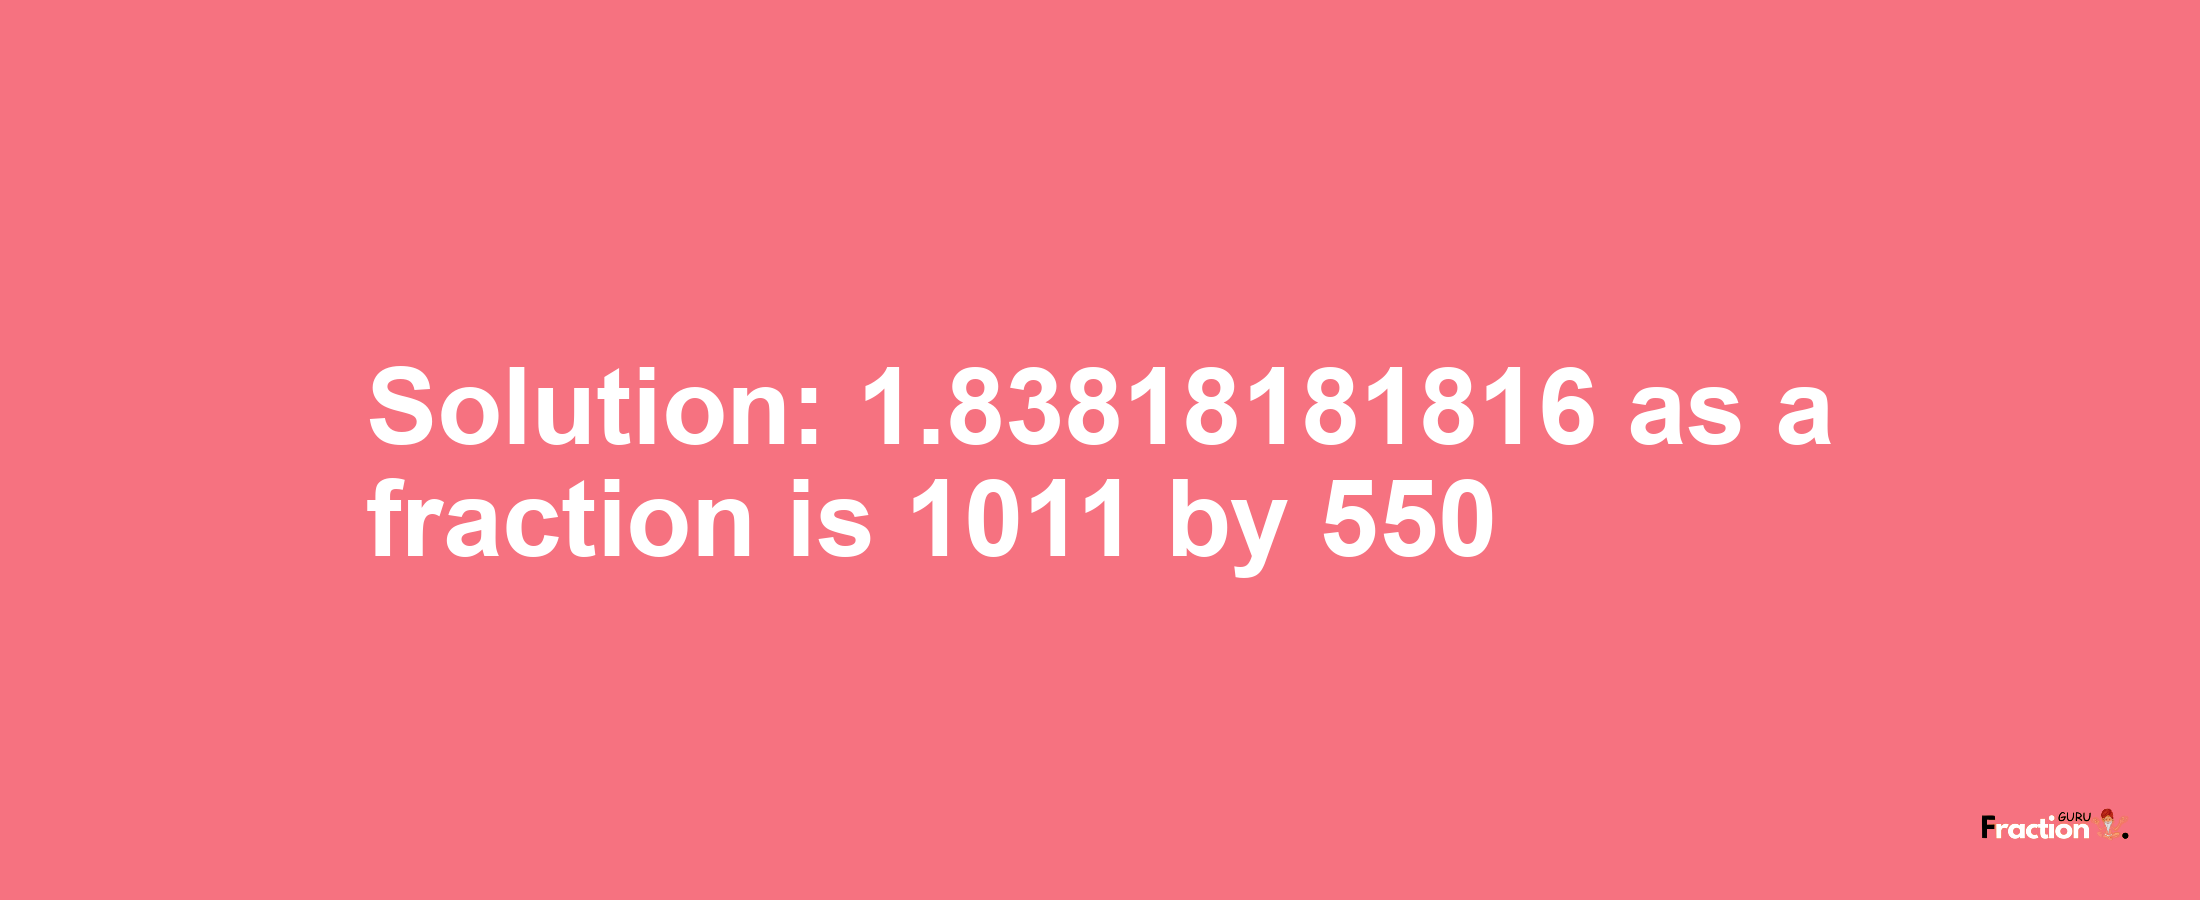 Solution:1.83818181816 as a fraction is 1011/550